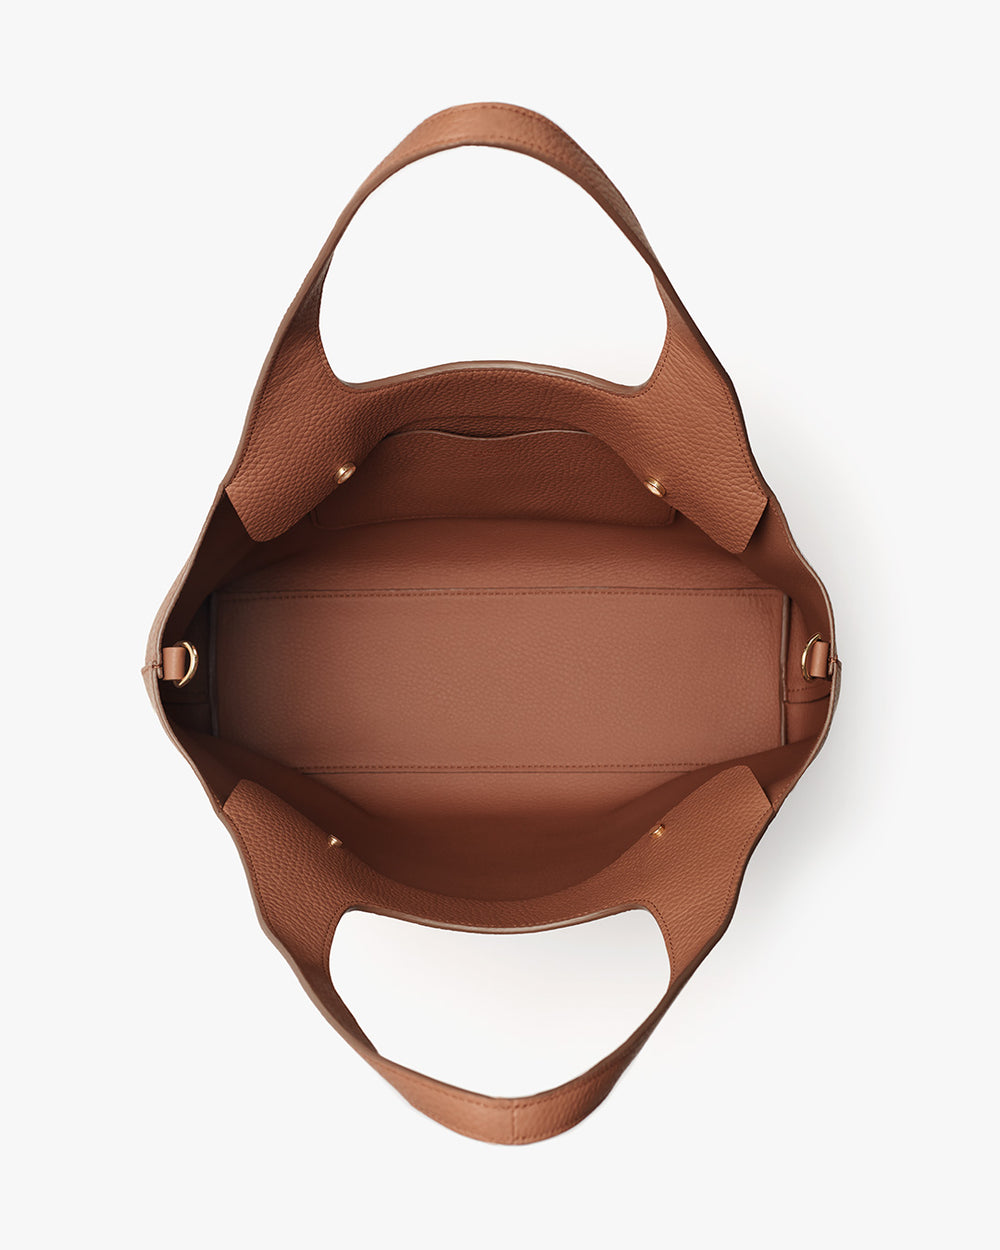 Top view of an open handbag showing the interior.